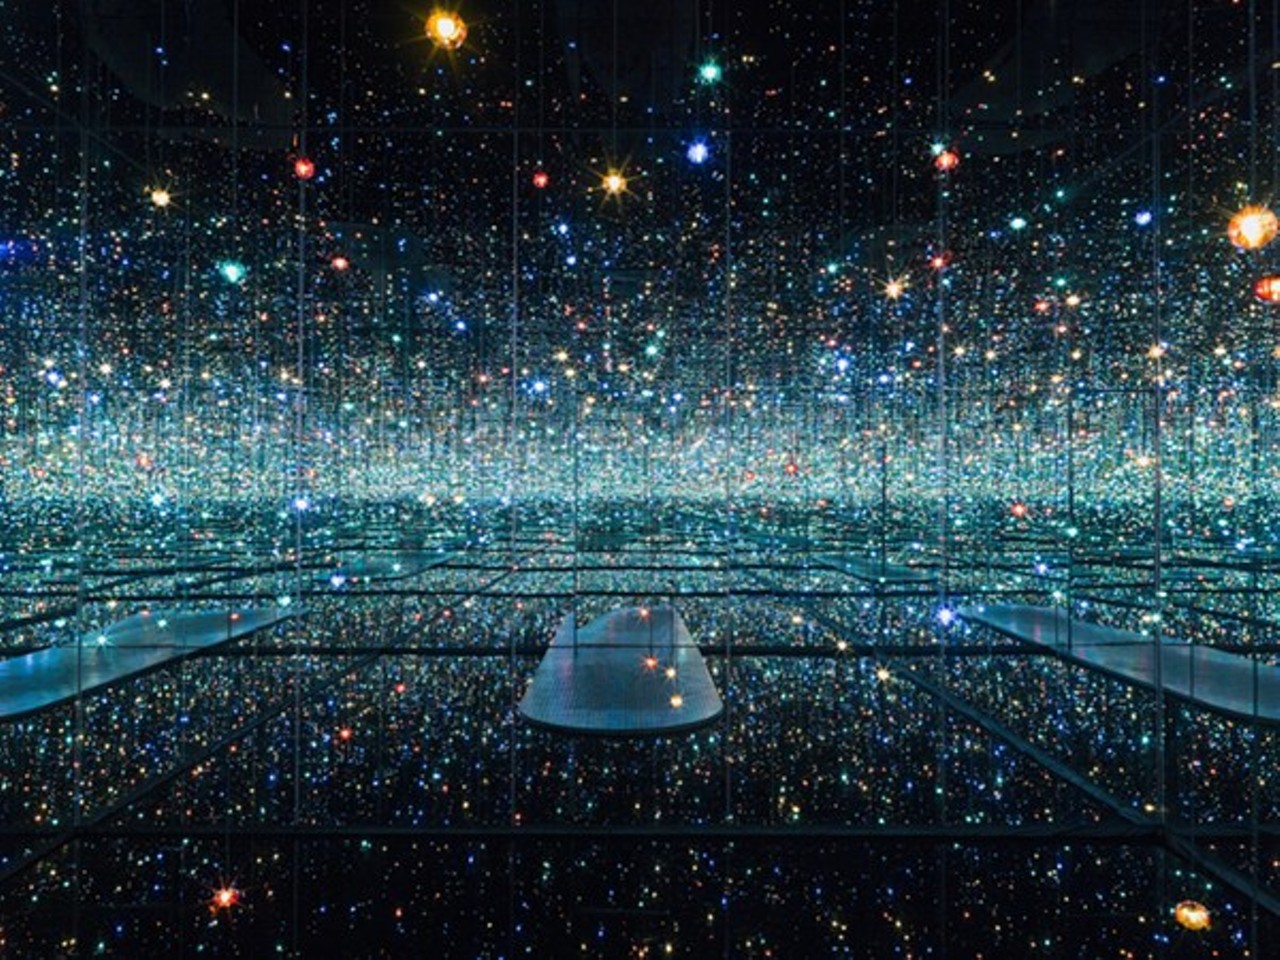  Infinity Mirrors At The Cleveland Museum Of Art
11150 East Blvd., Cleveland
If you waited in the digital line for tickets to Infinity Mirrors, the Cleveland Museum of Art's summer exhibit from Japanese artist Yayoi Kusama, you won't need this blurb to excite you. Throughout its summer run, beginning July 7, there will be 100,000 timed tickets available. (Most have already been sold, but some still remain for mid-week slots in August and September.) The exhibit includes seven of Kasama's spellbinding Infinity Mirror rooms and a host of paintings from various points during her 65-year career. The digital ticketing arrangement was the most elaborate in CMA's history and the exhibit is one of the most hyped. Along with Hamilton, it's the Cleveland cultural event of the year.
Photo via Scene Archives